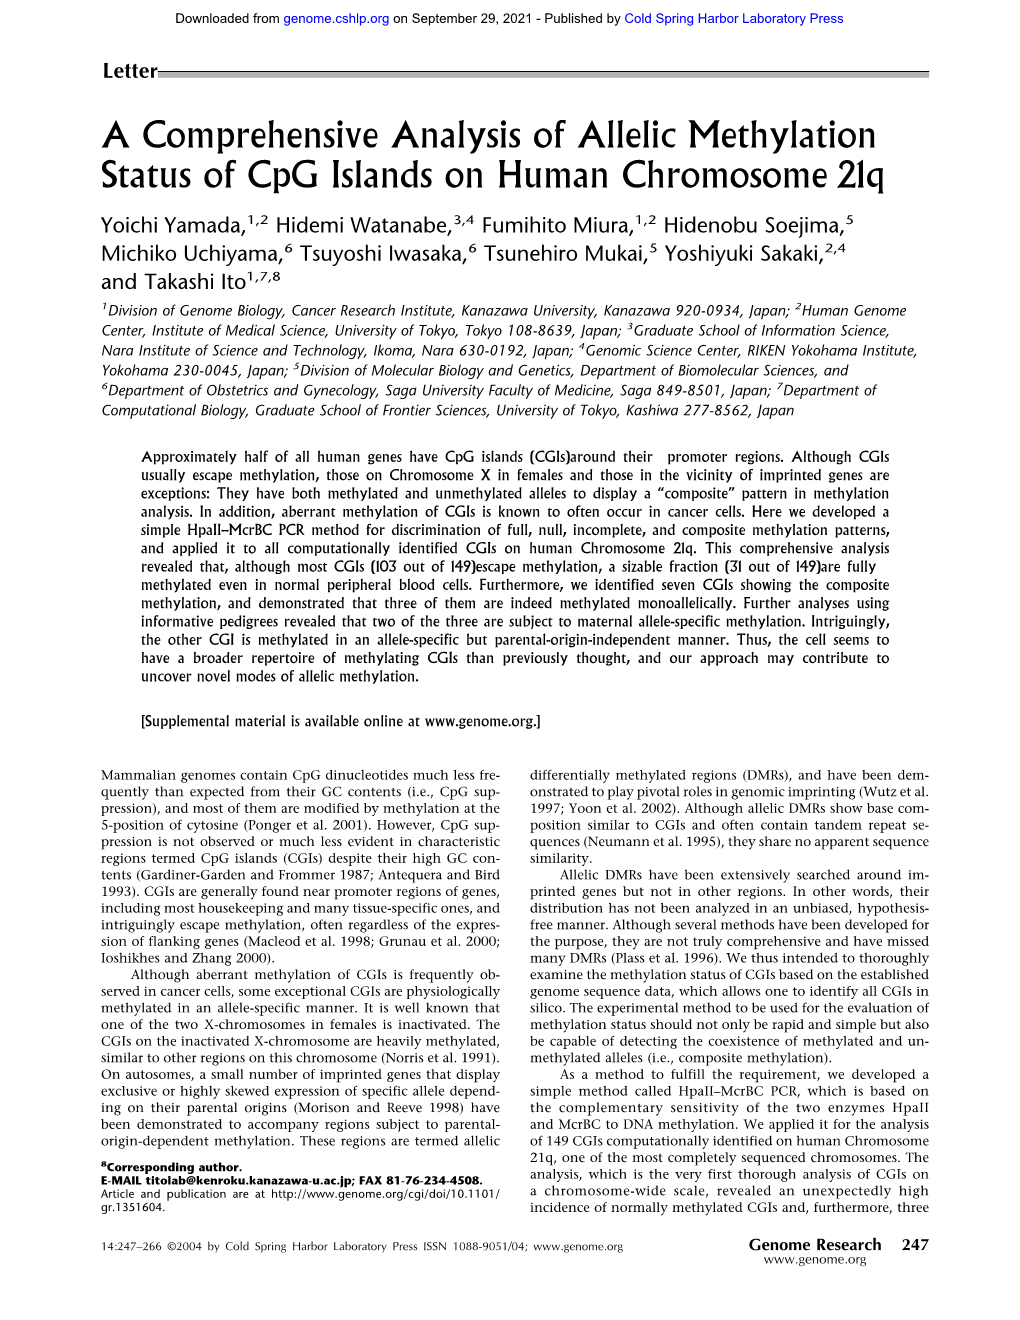 A Comprehensive Analysis of Allelic Methylation Status of Cpg Islands